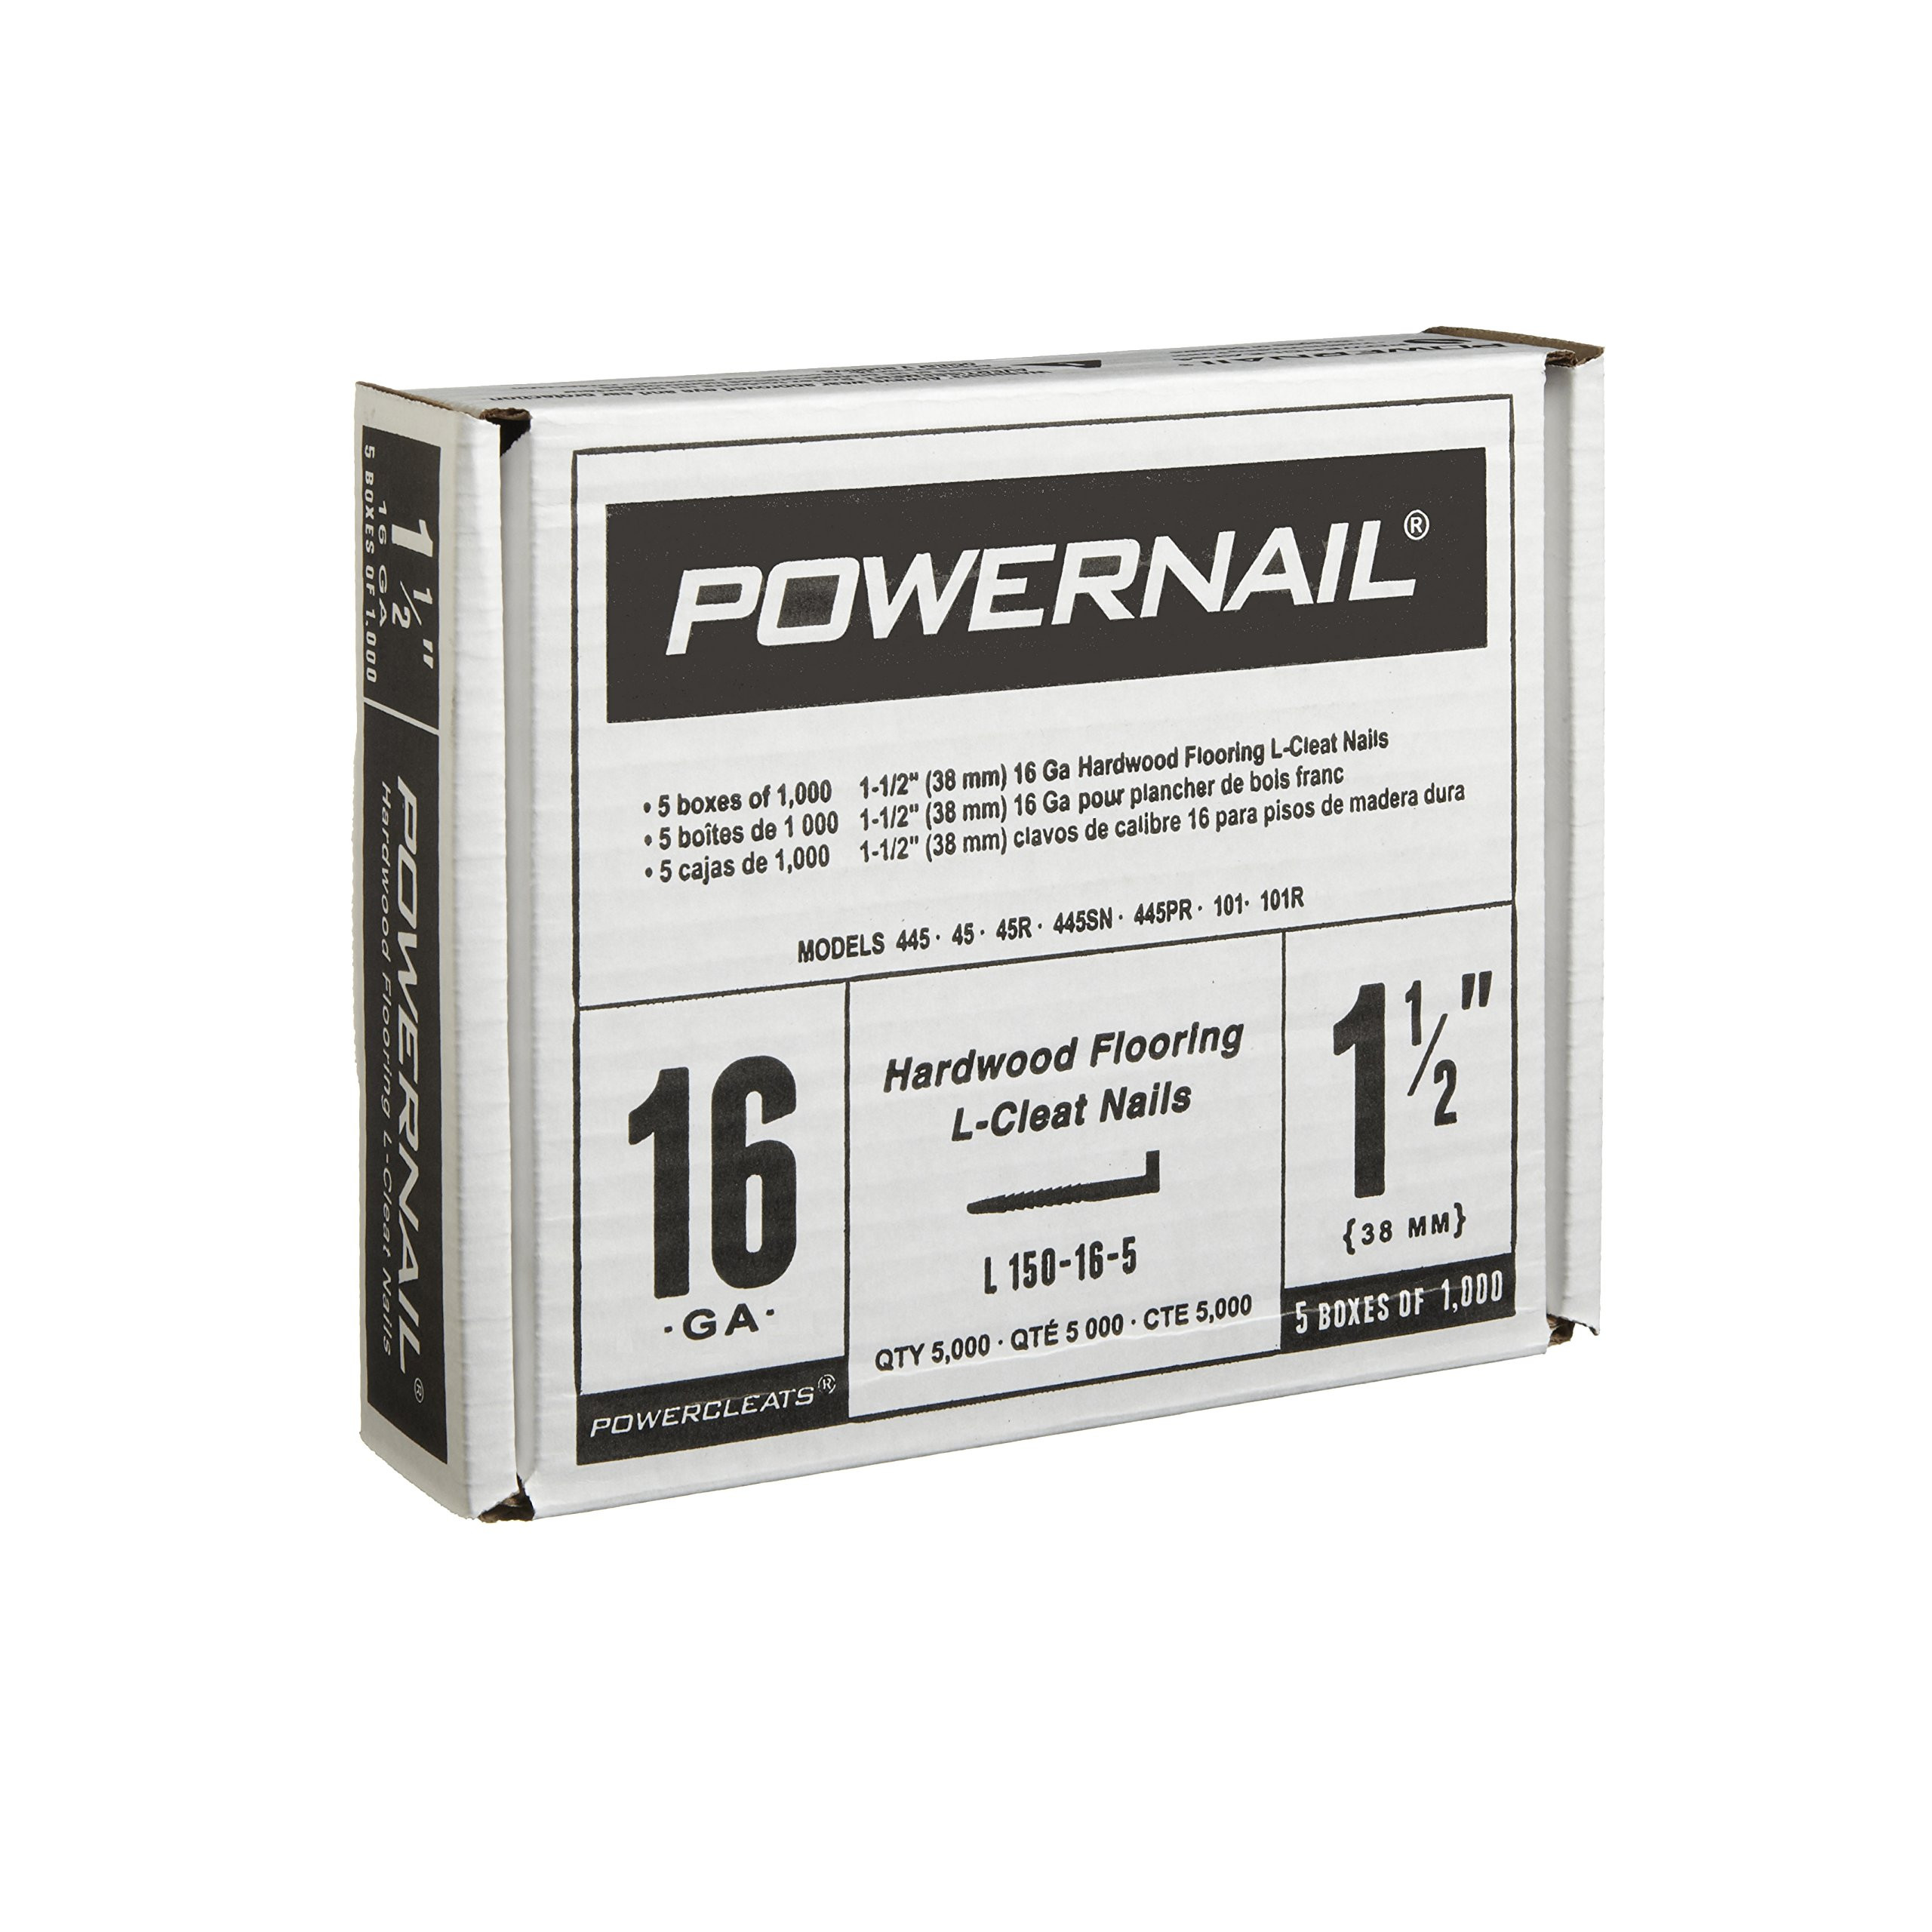 11 Awesome Hardwood Flooring Nails or Staples 2024 free download hardwood flooring nails or staples of amazon com powernail 16 gage 1 1 2 cleats flooring nails box of pertaining to amazon com powernail 16 gage 1 1 2 cleats flooring nails box of 5000 home 